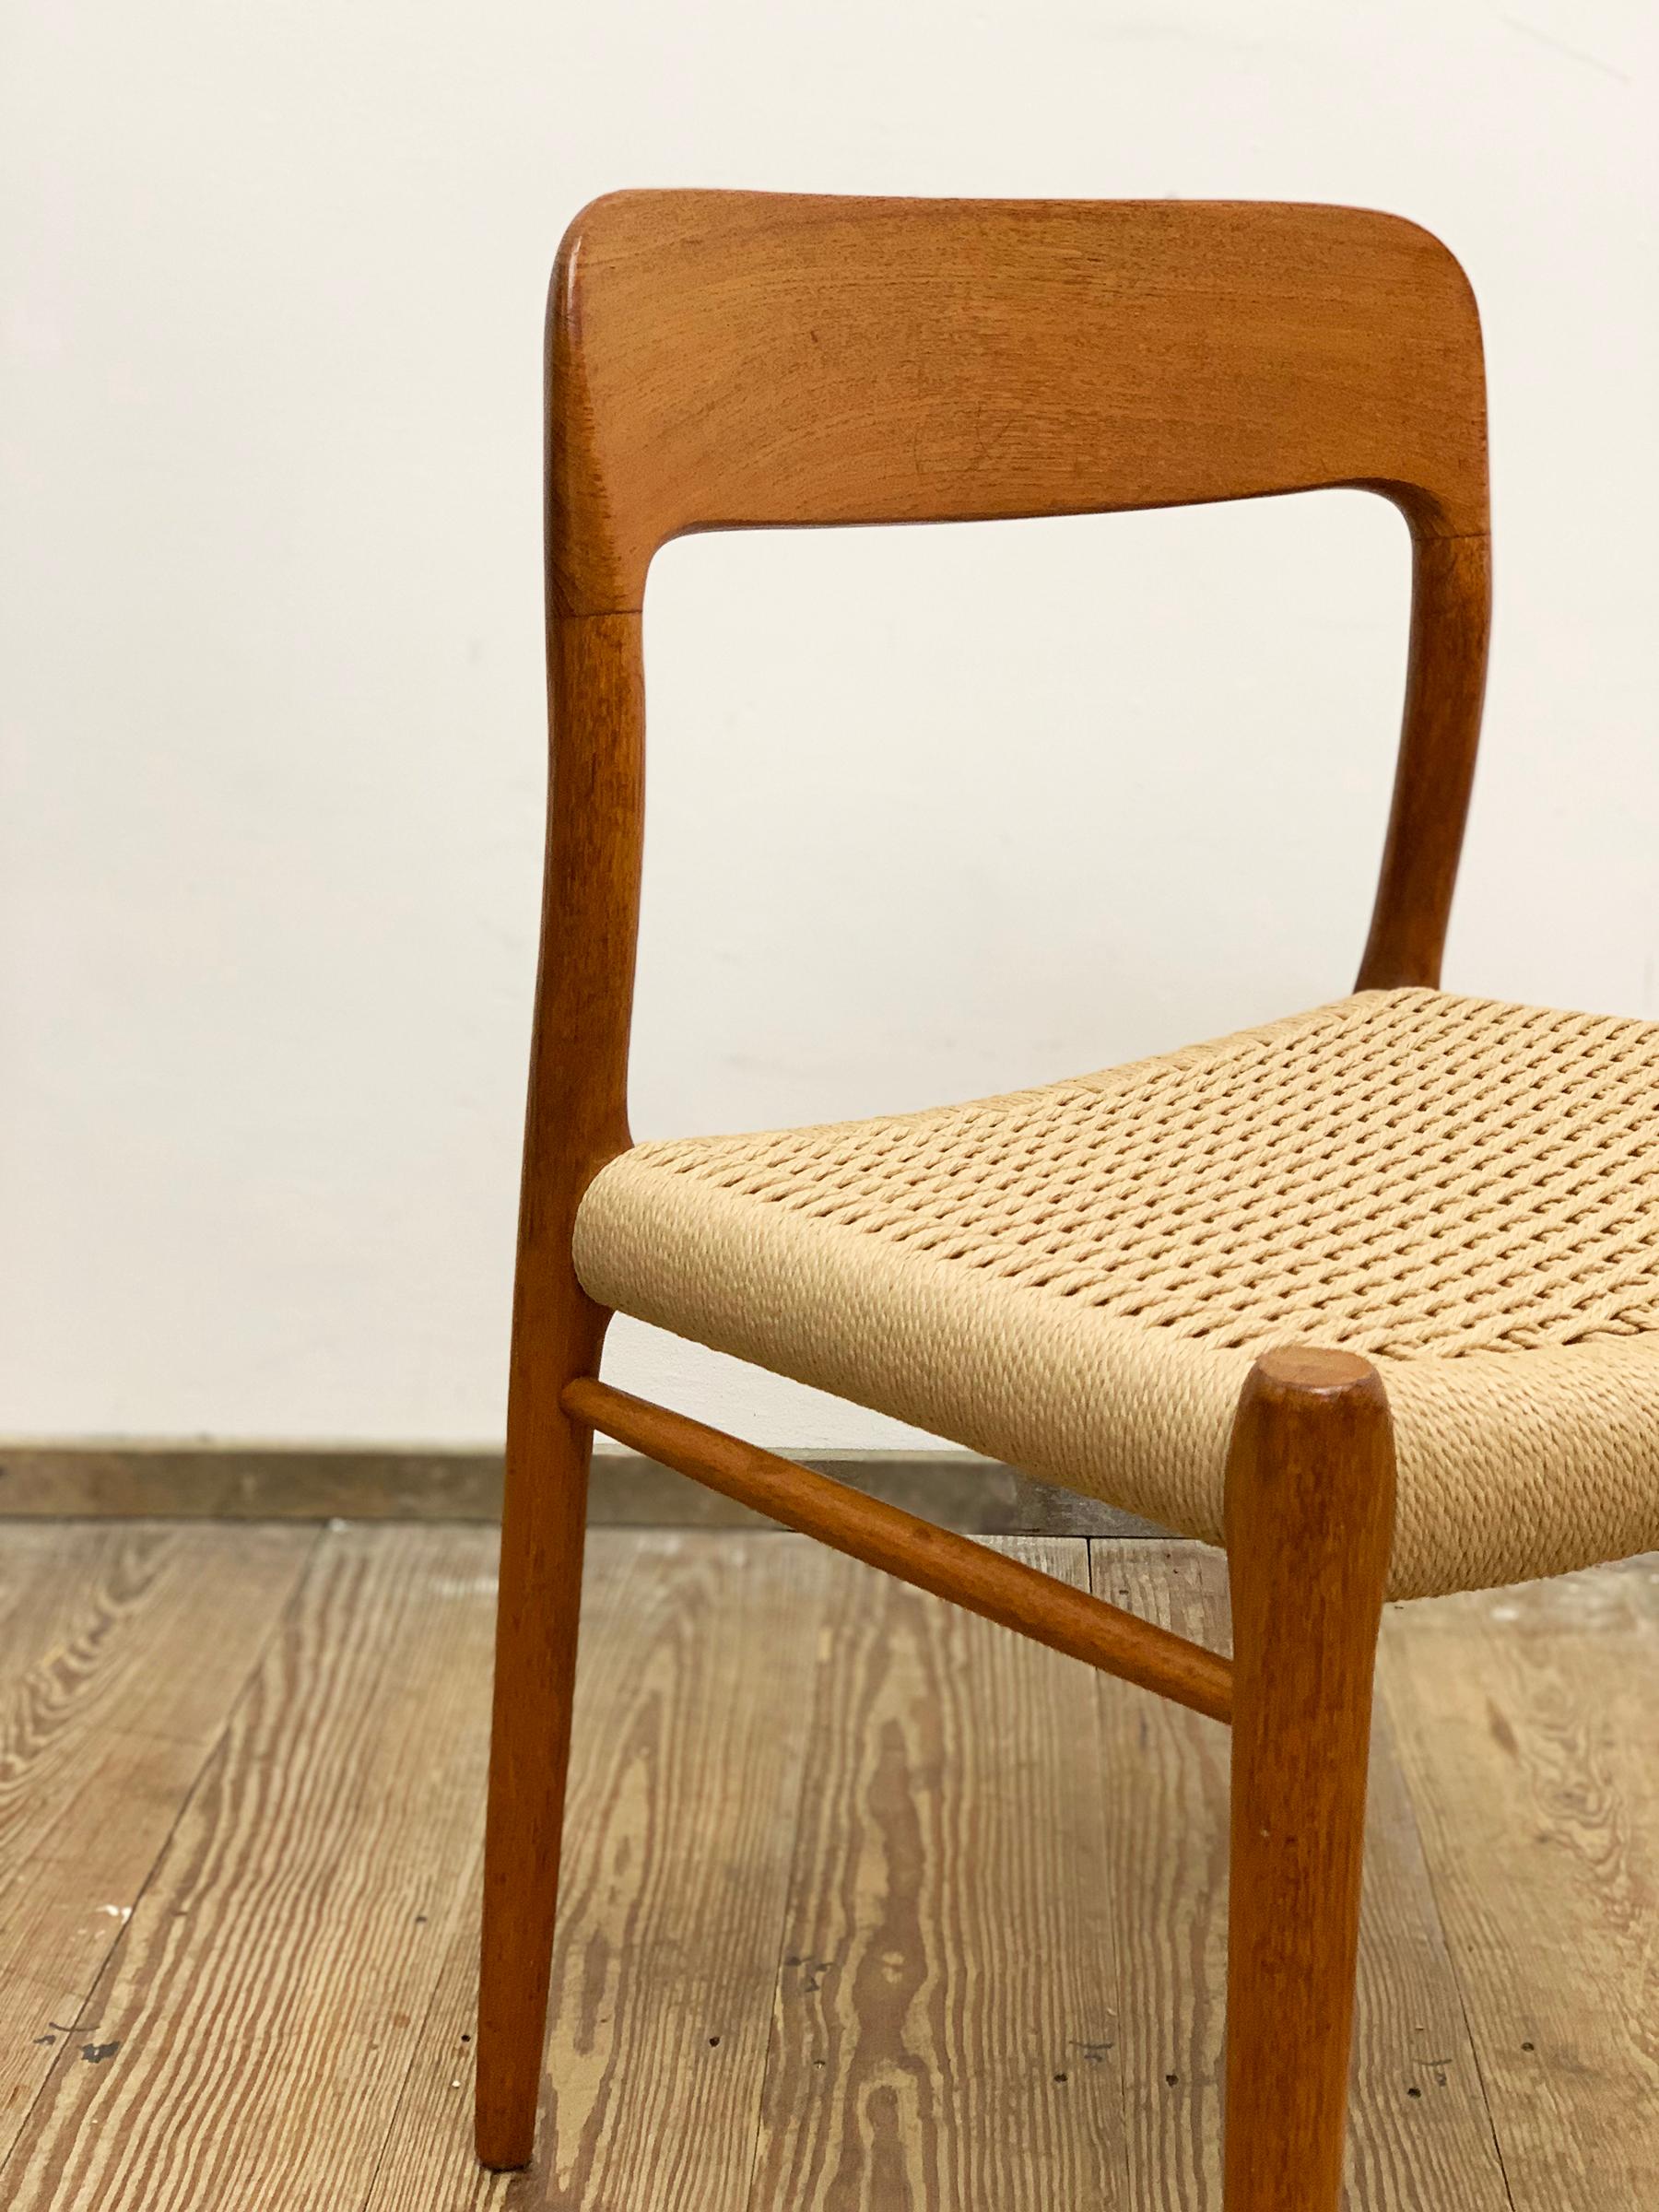 Mid-20th Century Mid-Century Teak Dining or Side Chair #75 by Niels O. Møller for J. L. Moller For Sale